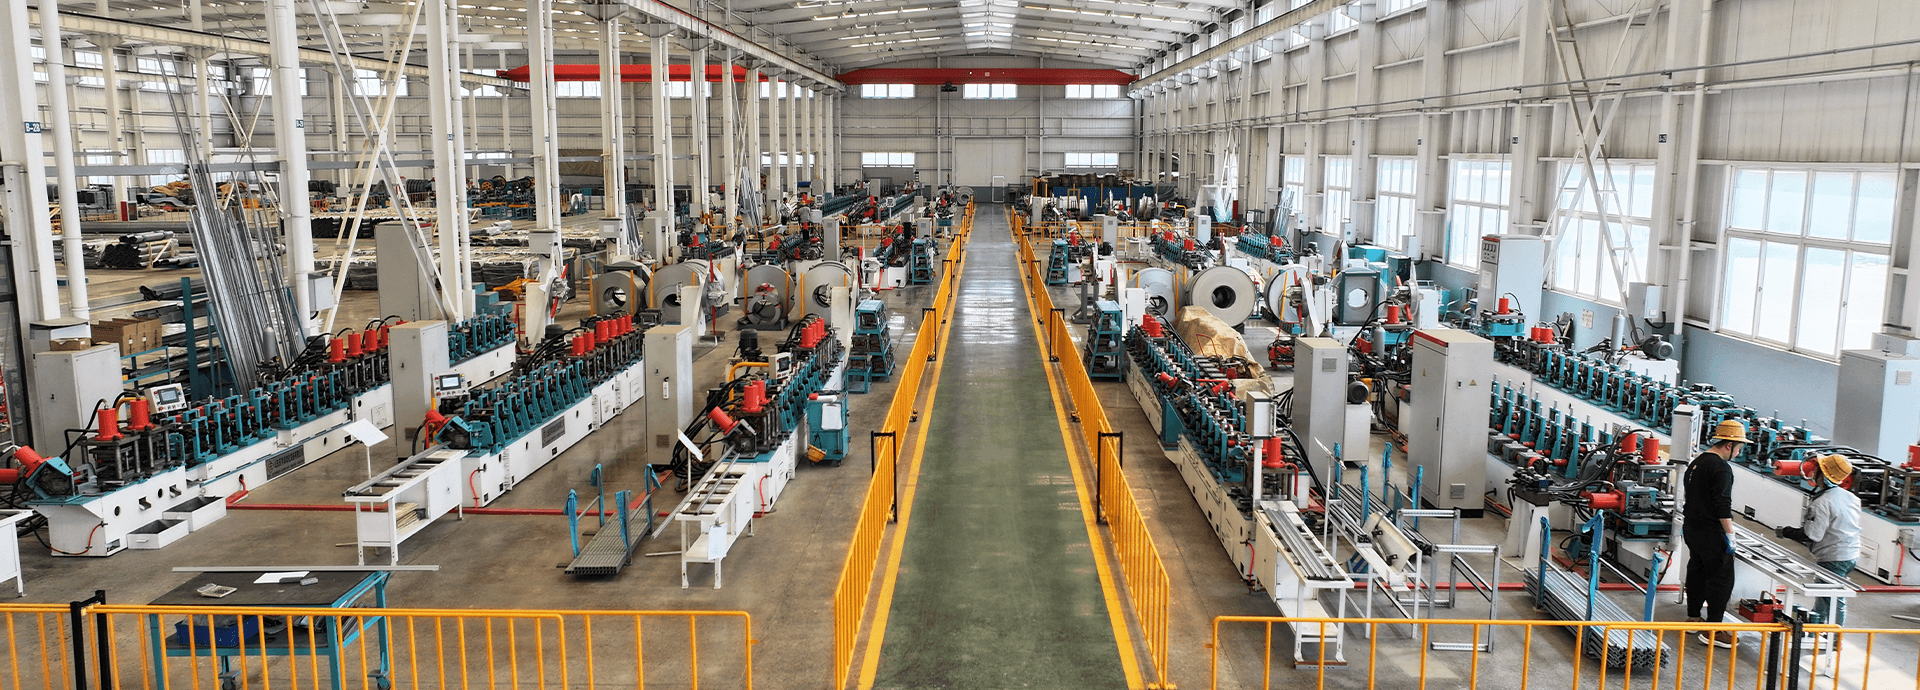 PRECISE ROLL FORMING MACHINE